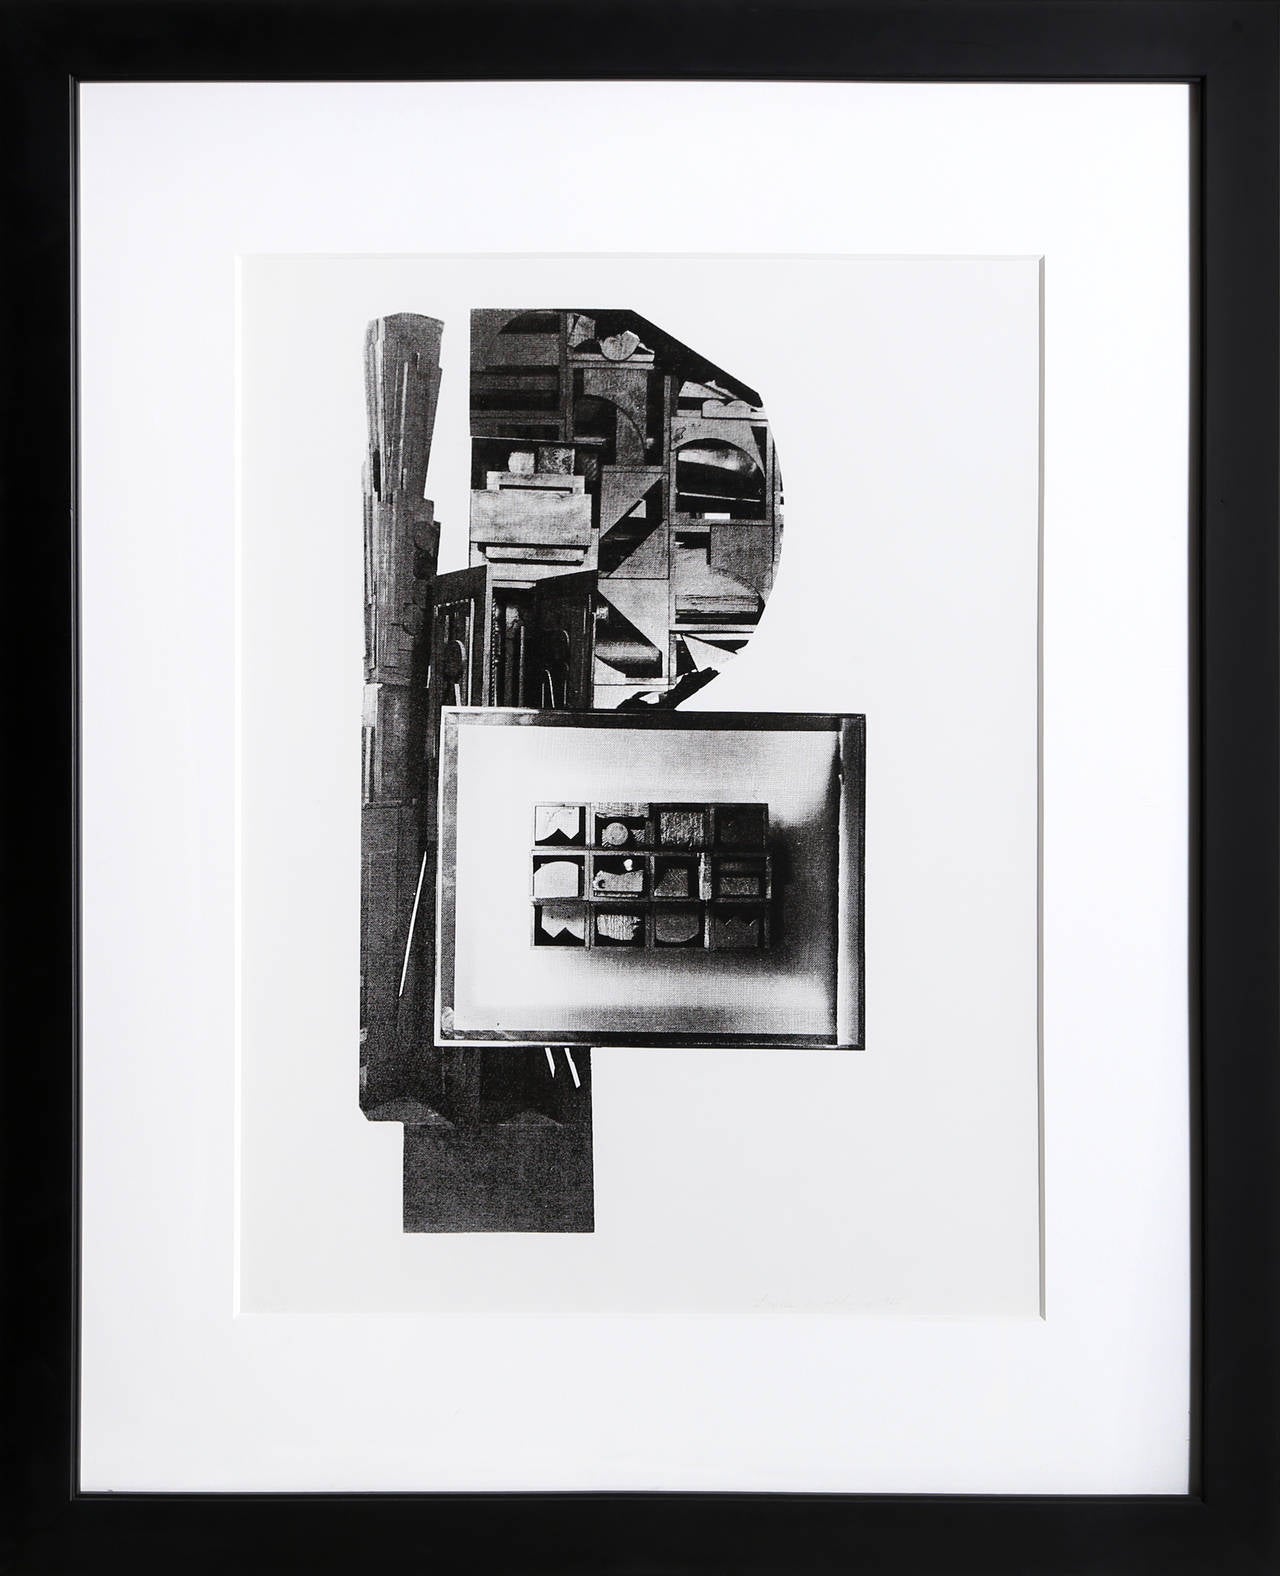 A silkscreen print by Louise Nevelson from 1966. An abstract composition of black and white photographic imagery.

Artist: Louise Nevelson
Title: Facades 1
Year: 1966
Medium: Silkscreen, Signed and Numbered in Pencil
Edition: 15/125
Size: 22 in. x